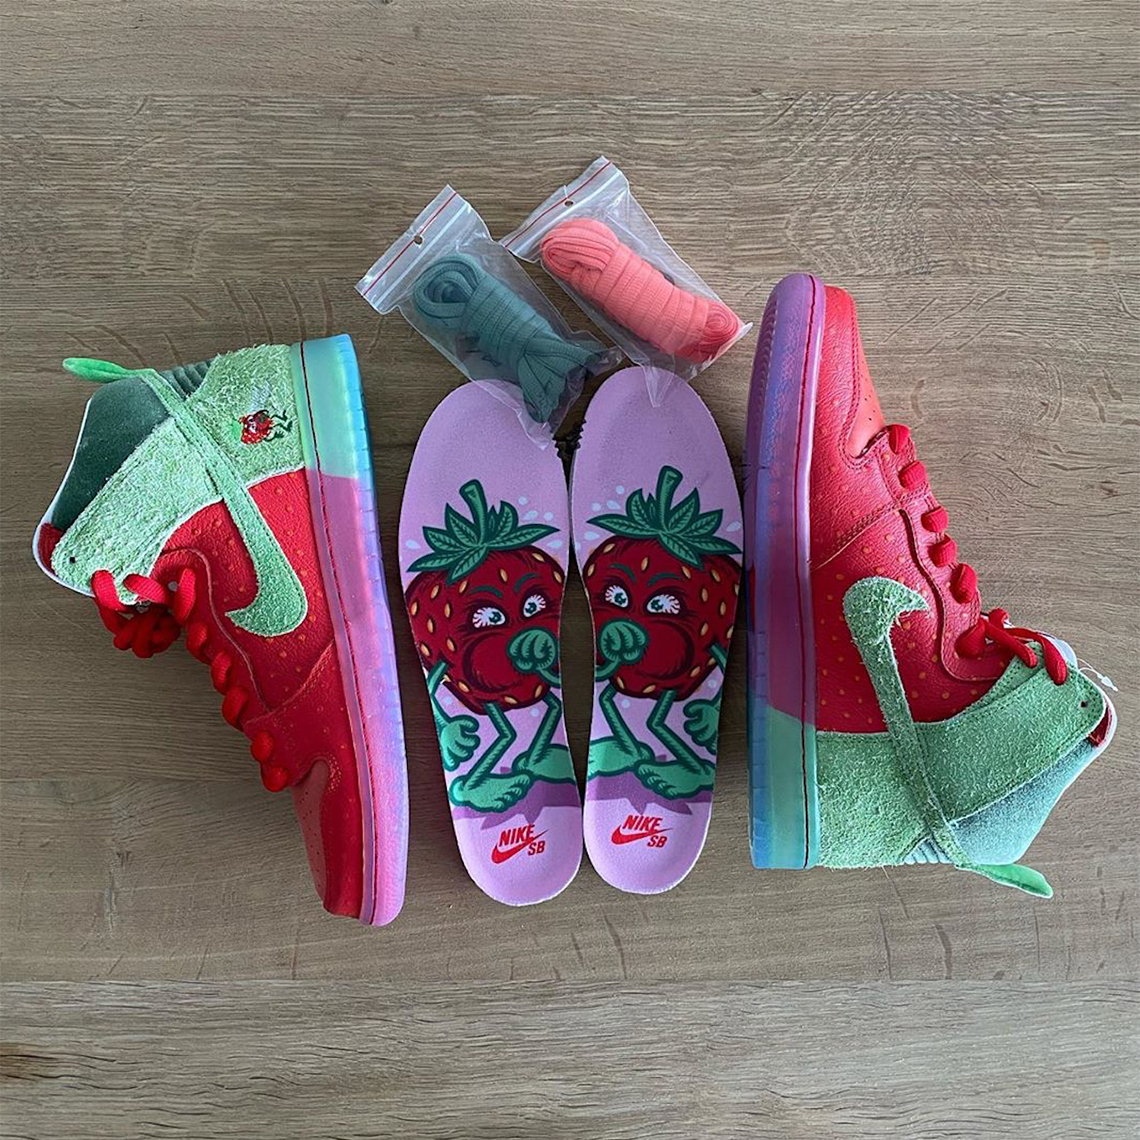 nike sb dunk high strawberry cough stores